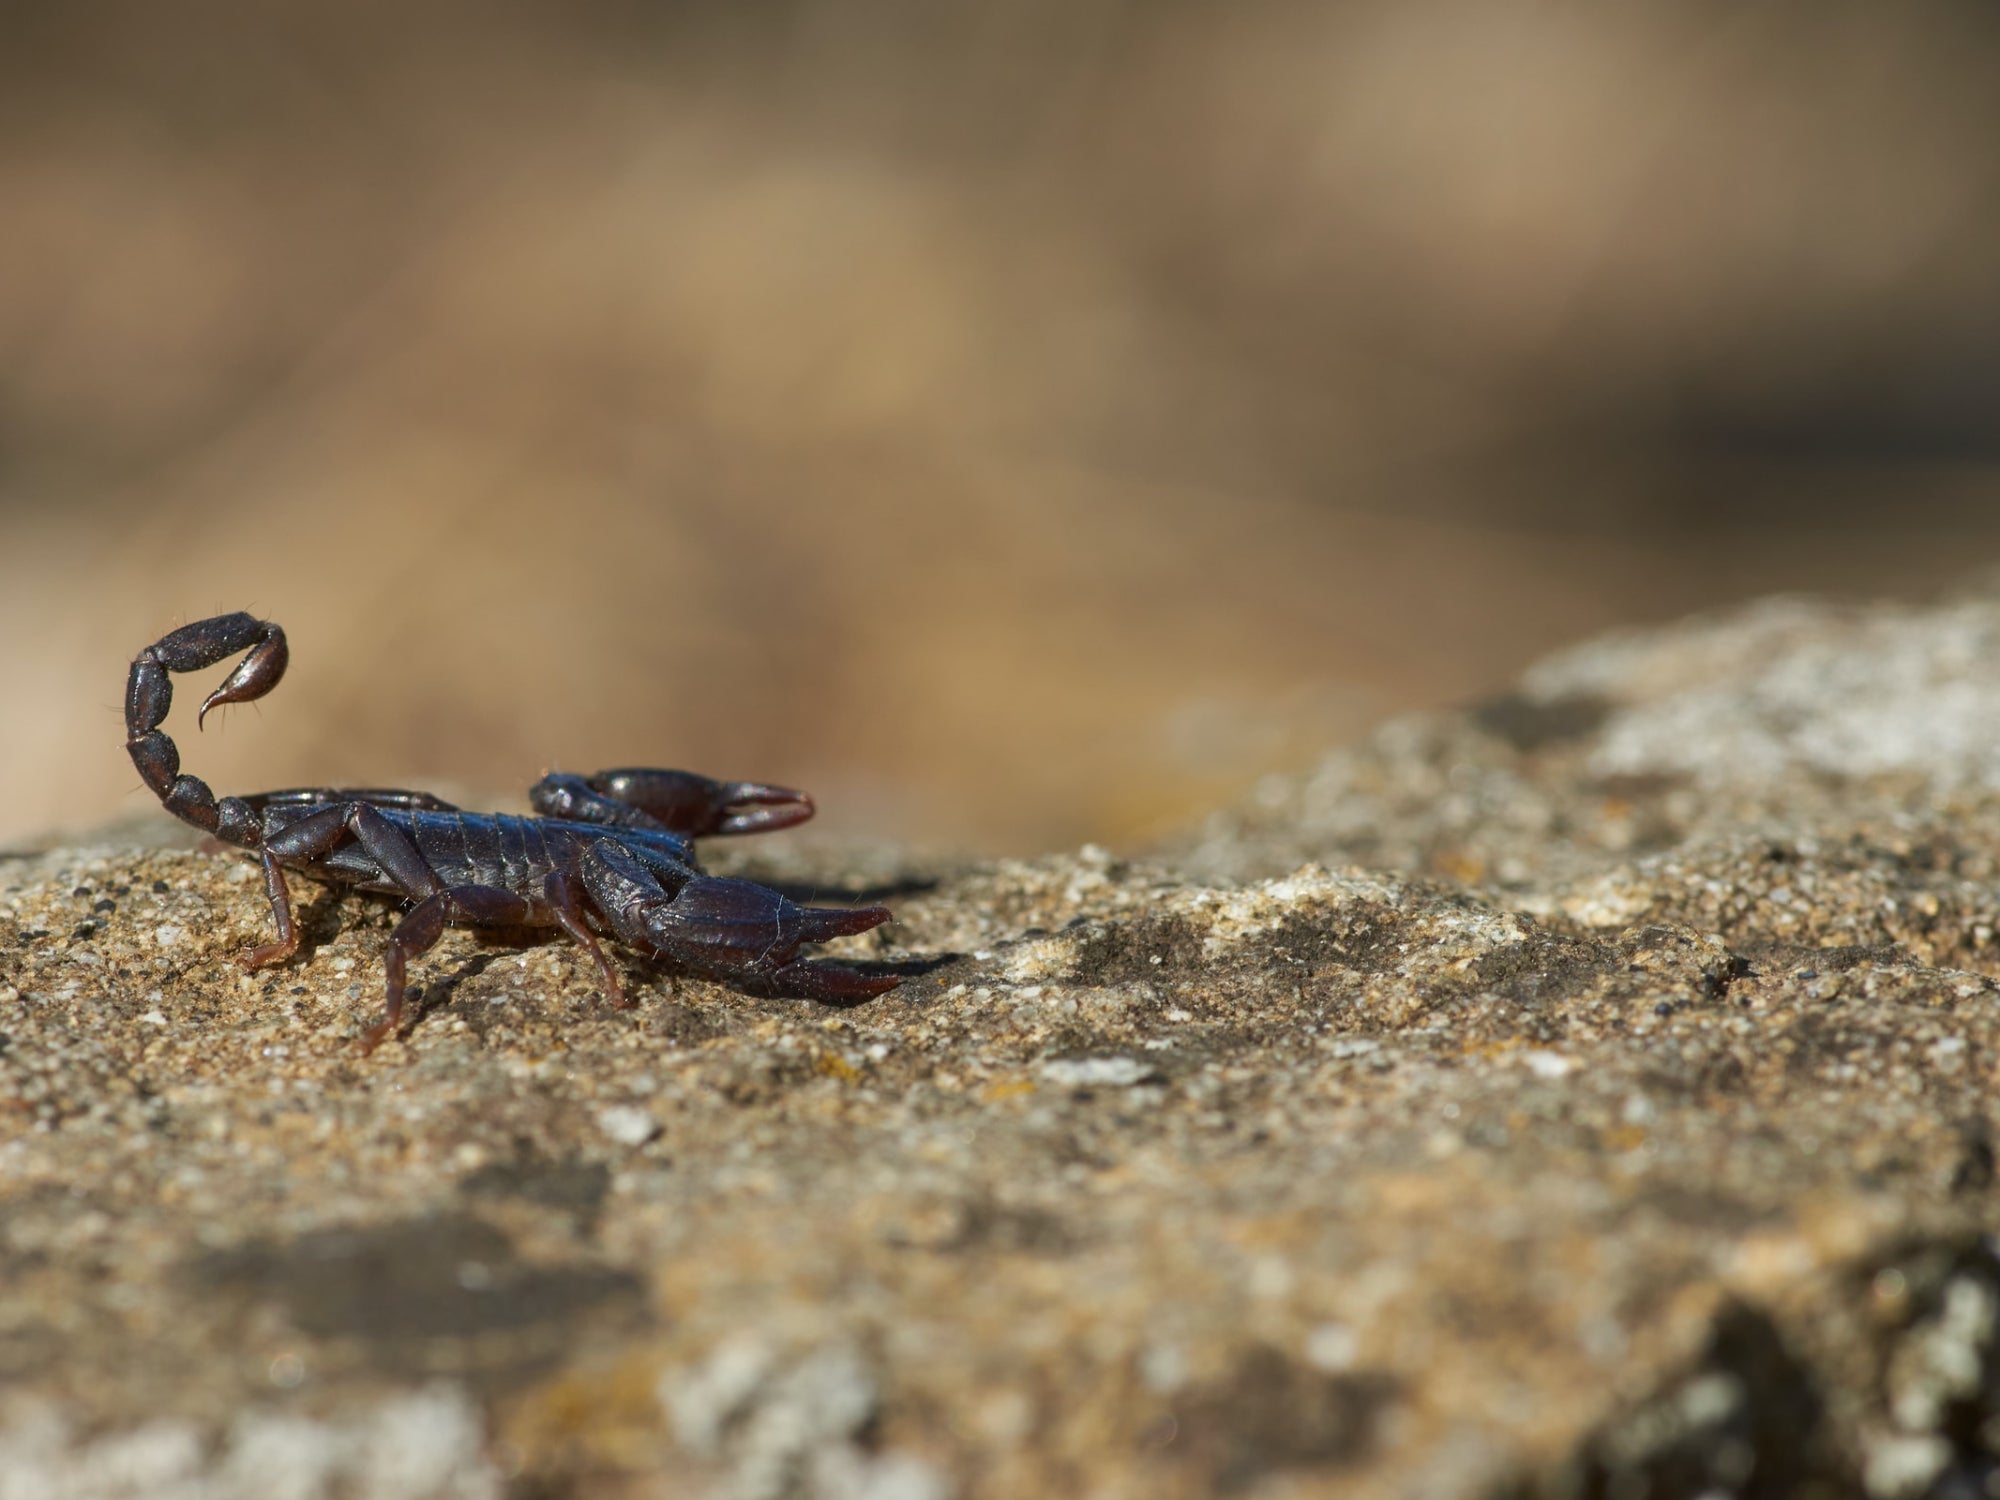 What to know when venturing into scorpion territory